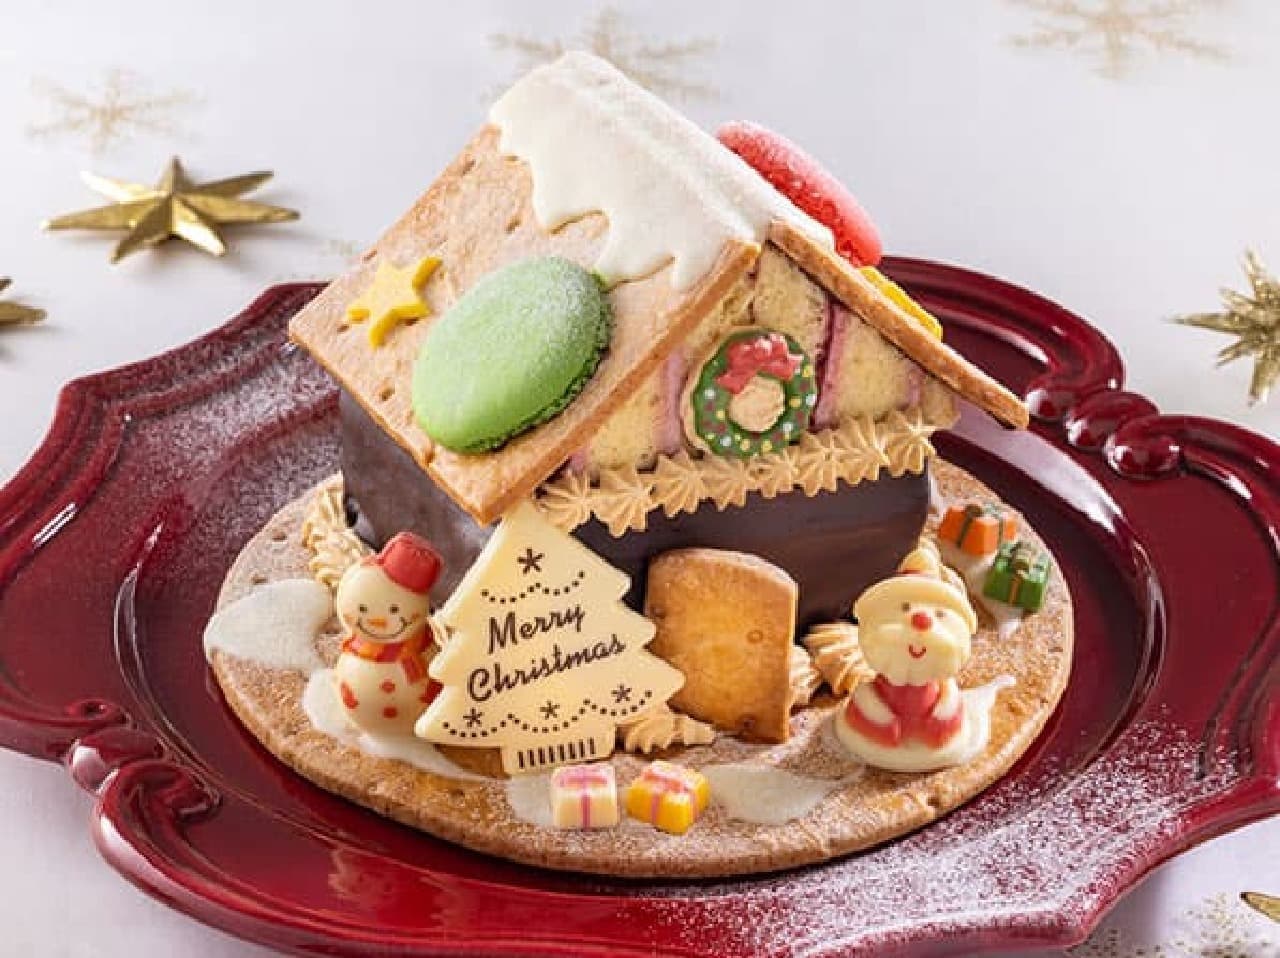 Flo "Xmas Santa's Candy House [Reservation & Limited Quantity]".